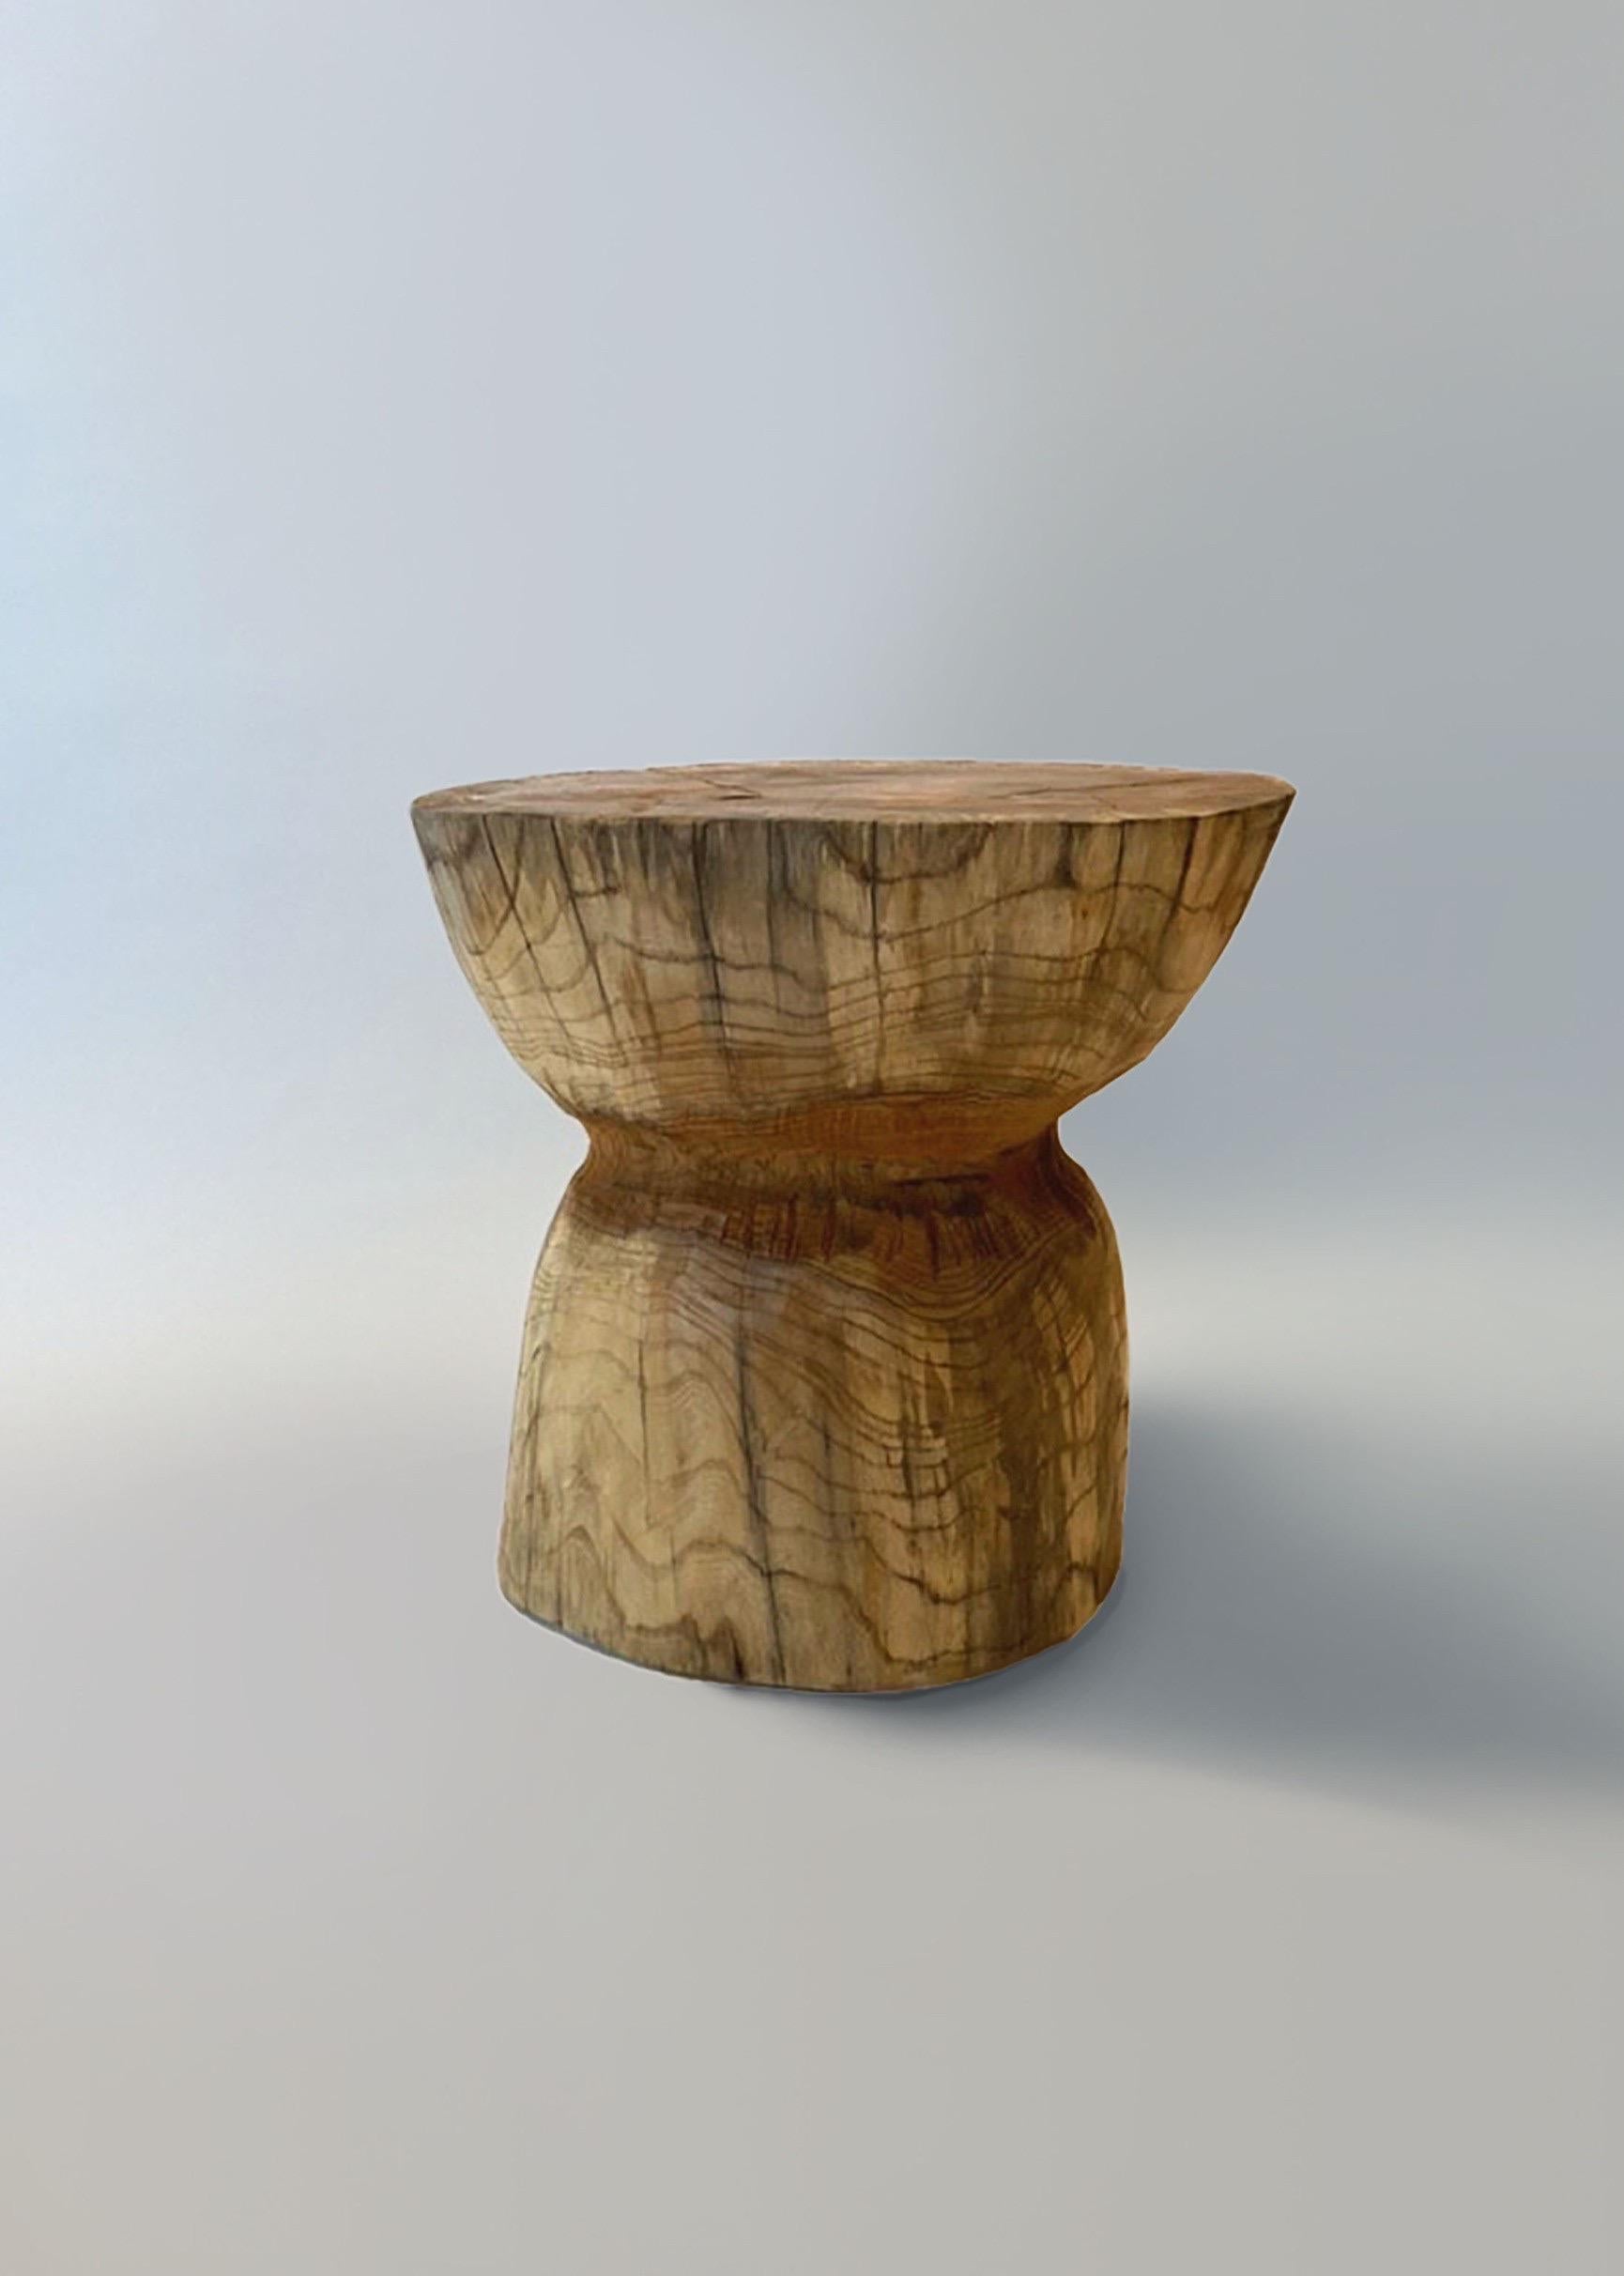 Name: Summer twilight 1
Sculptural stool by Zogei carved furniture
Material: Zelkova
This work is carved from log with some kinds of chainsaws.
Most of wood used for Nishimura's works are unable to use anything, these woods are unsuitable